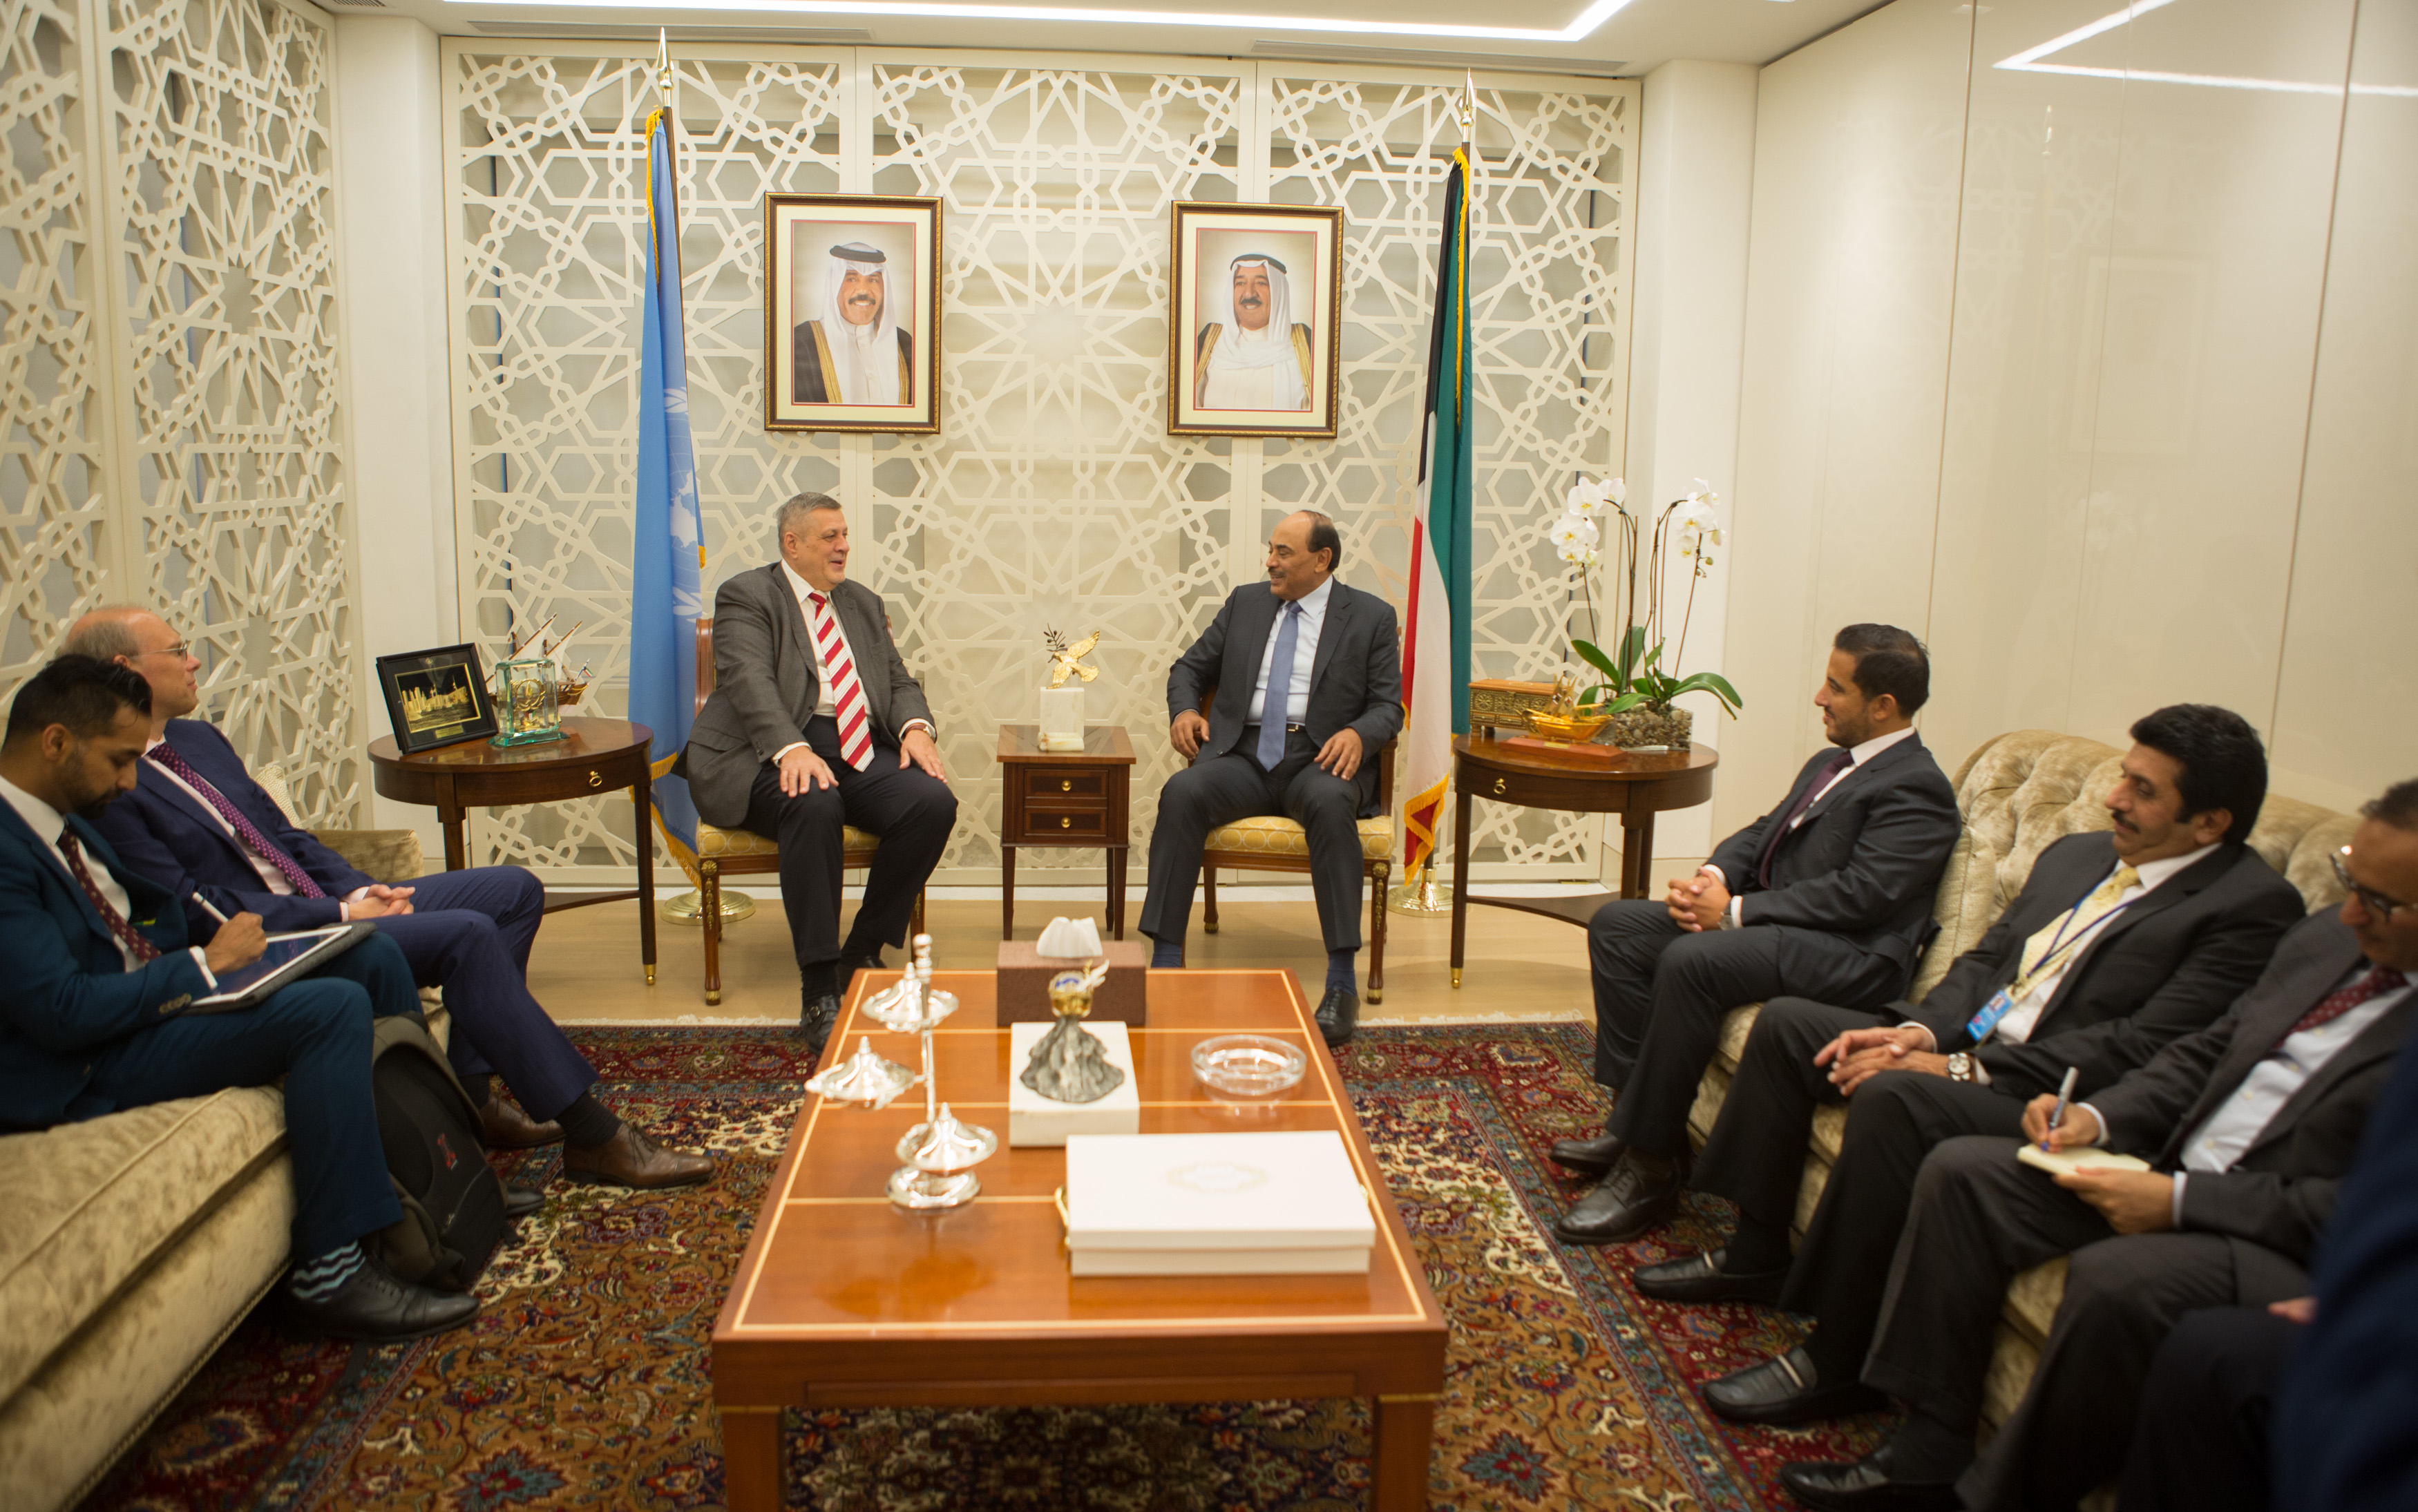 Kuwait's Deputy Prime Minister and Foreign Minister Sheikh Sabah Khaled Al-Hamad Al-Sabah meets the United Nations' special representative and head of its mission to Iraq (UNAMI) Jan Kubis